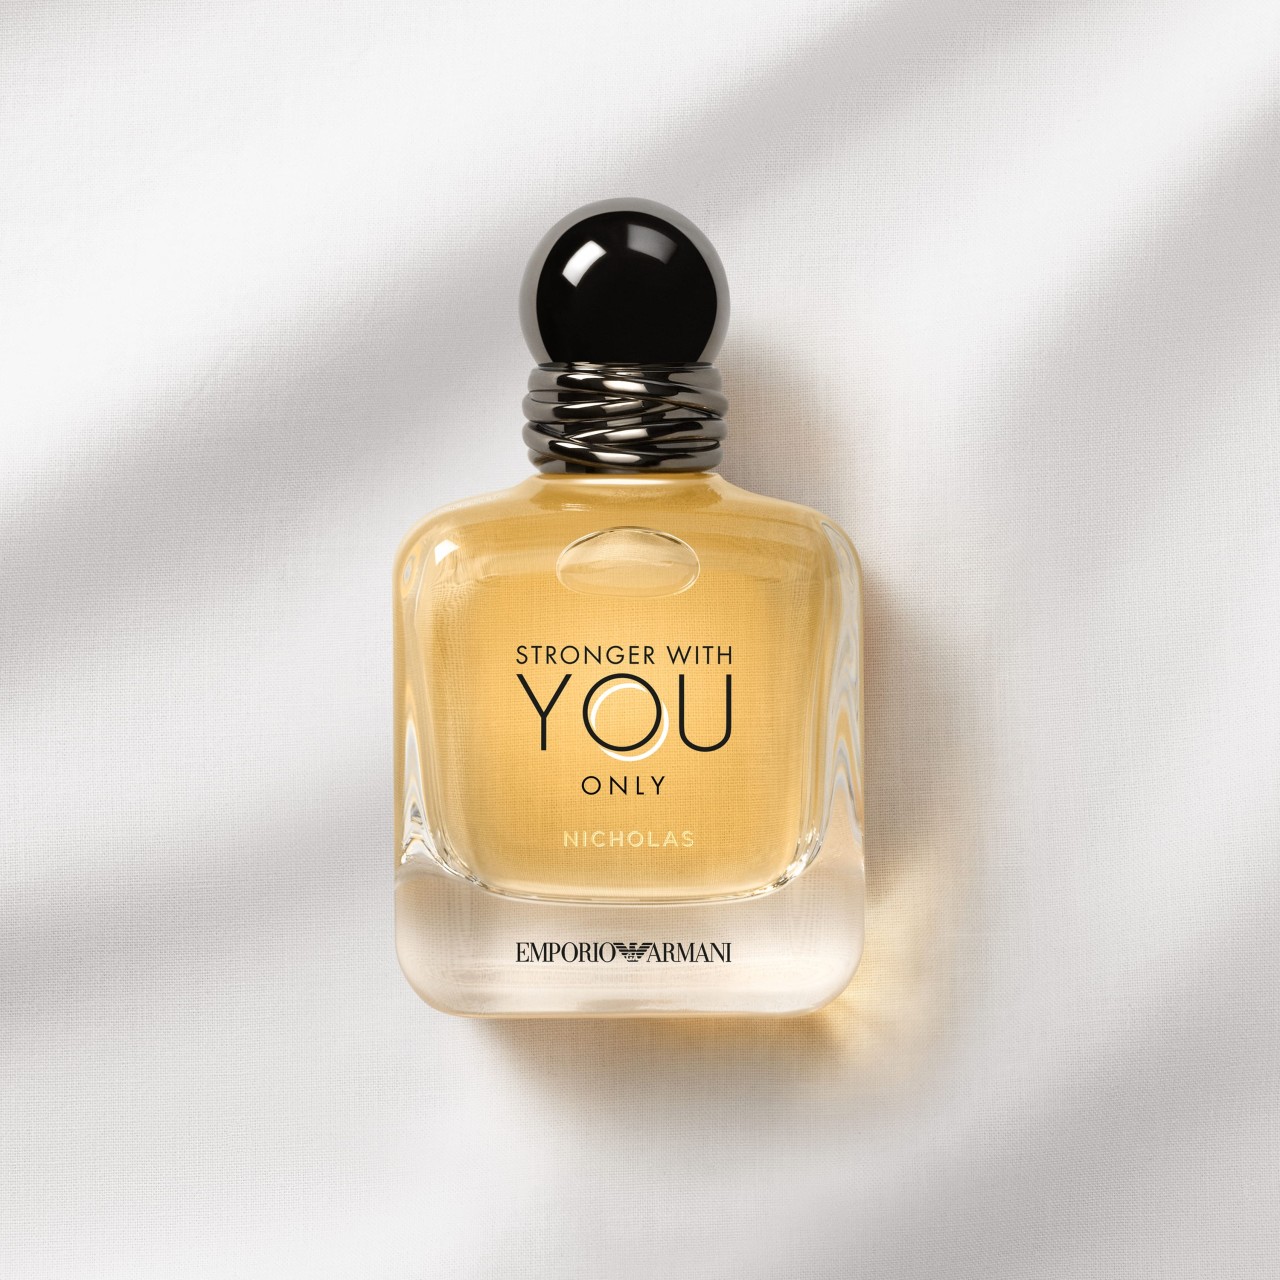 Giorgio Armani - Stronger With You Only Edt Spray - 